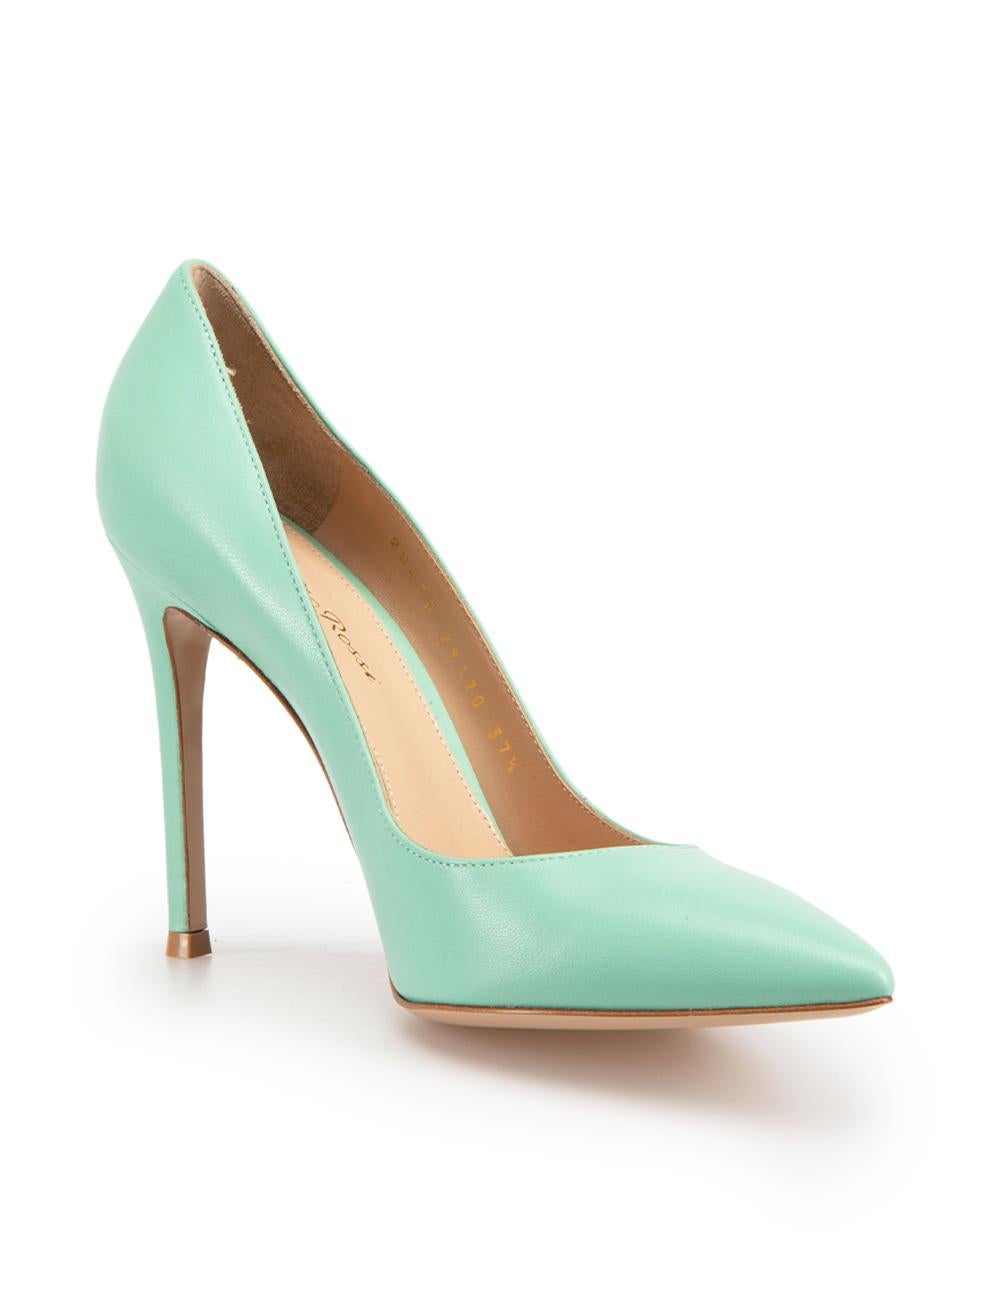 CONDITION is Never Worn. No visible wear to shoes is evident on this used Gianvito Rossi designer resale item.



Details


Mint green

Leather

Slip on pumps

Point toe

High heeled



 

Made in Italy 

 

Composition

EXTERIOR: Leather

INTERIOR: